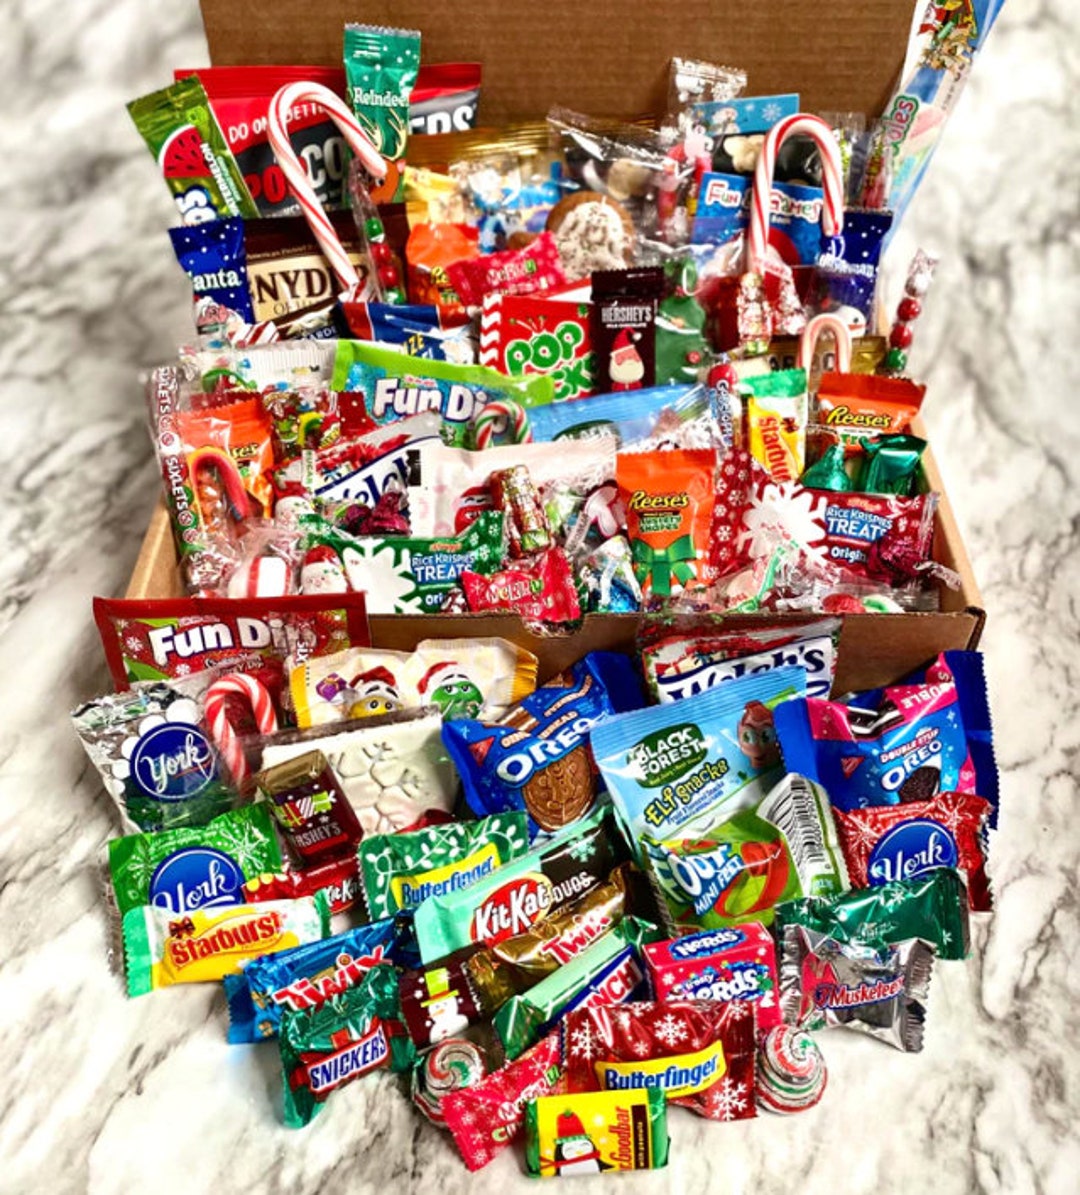 The Ultimate 50 Pack Snack Box – Munchie Mountain